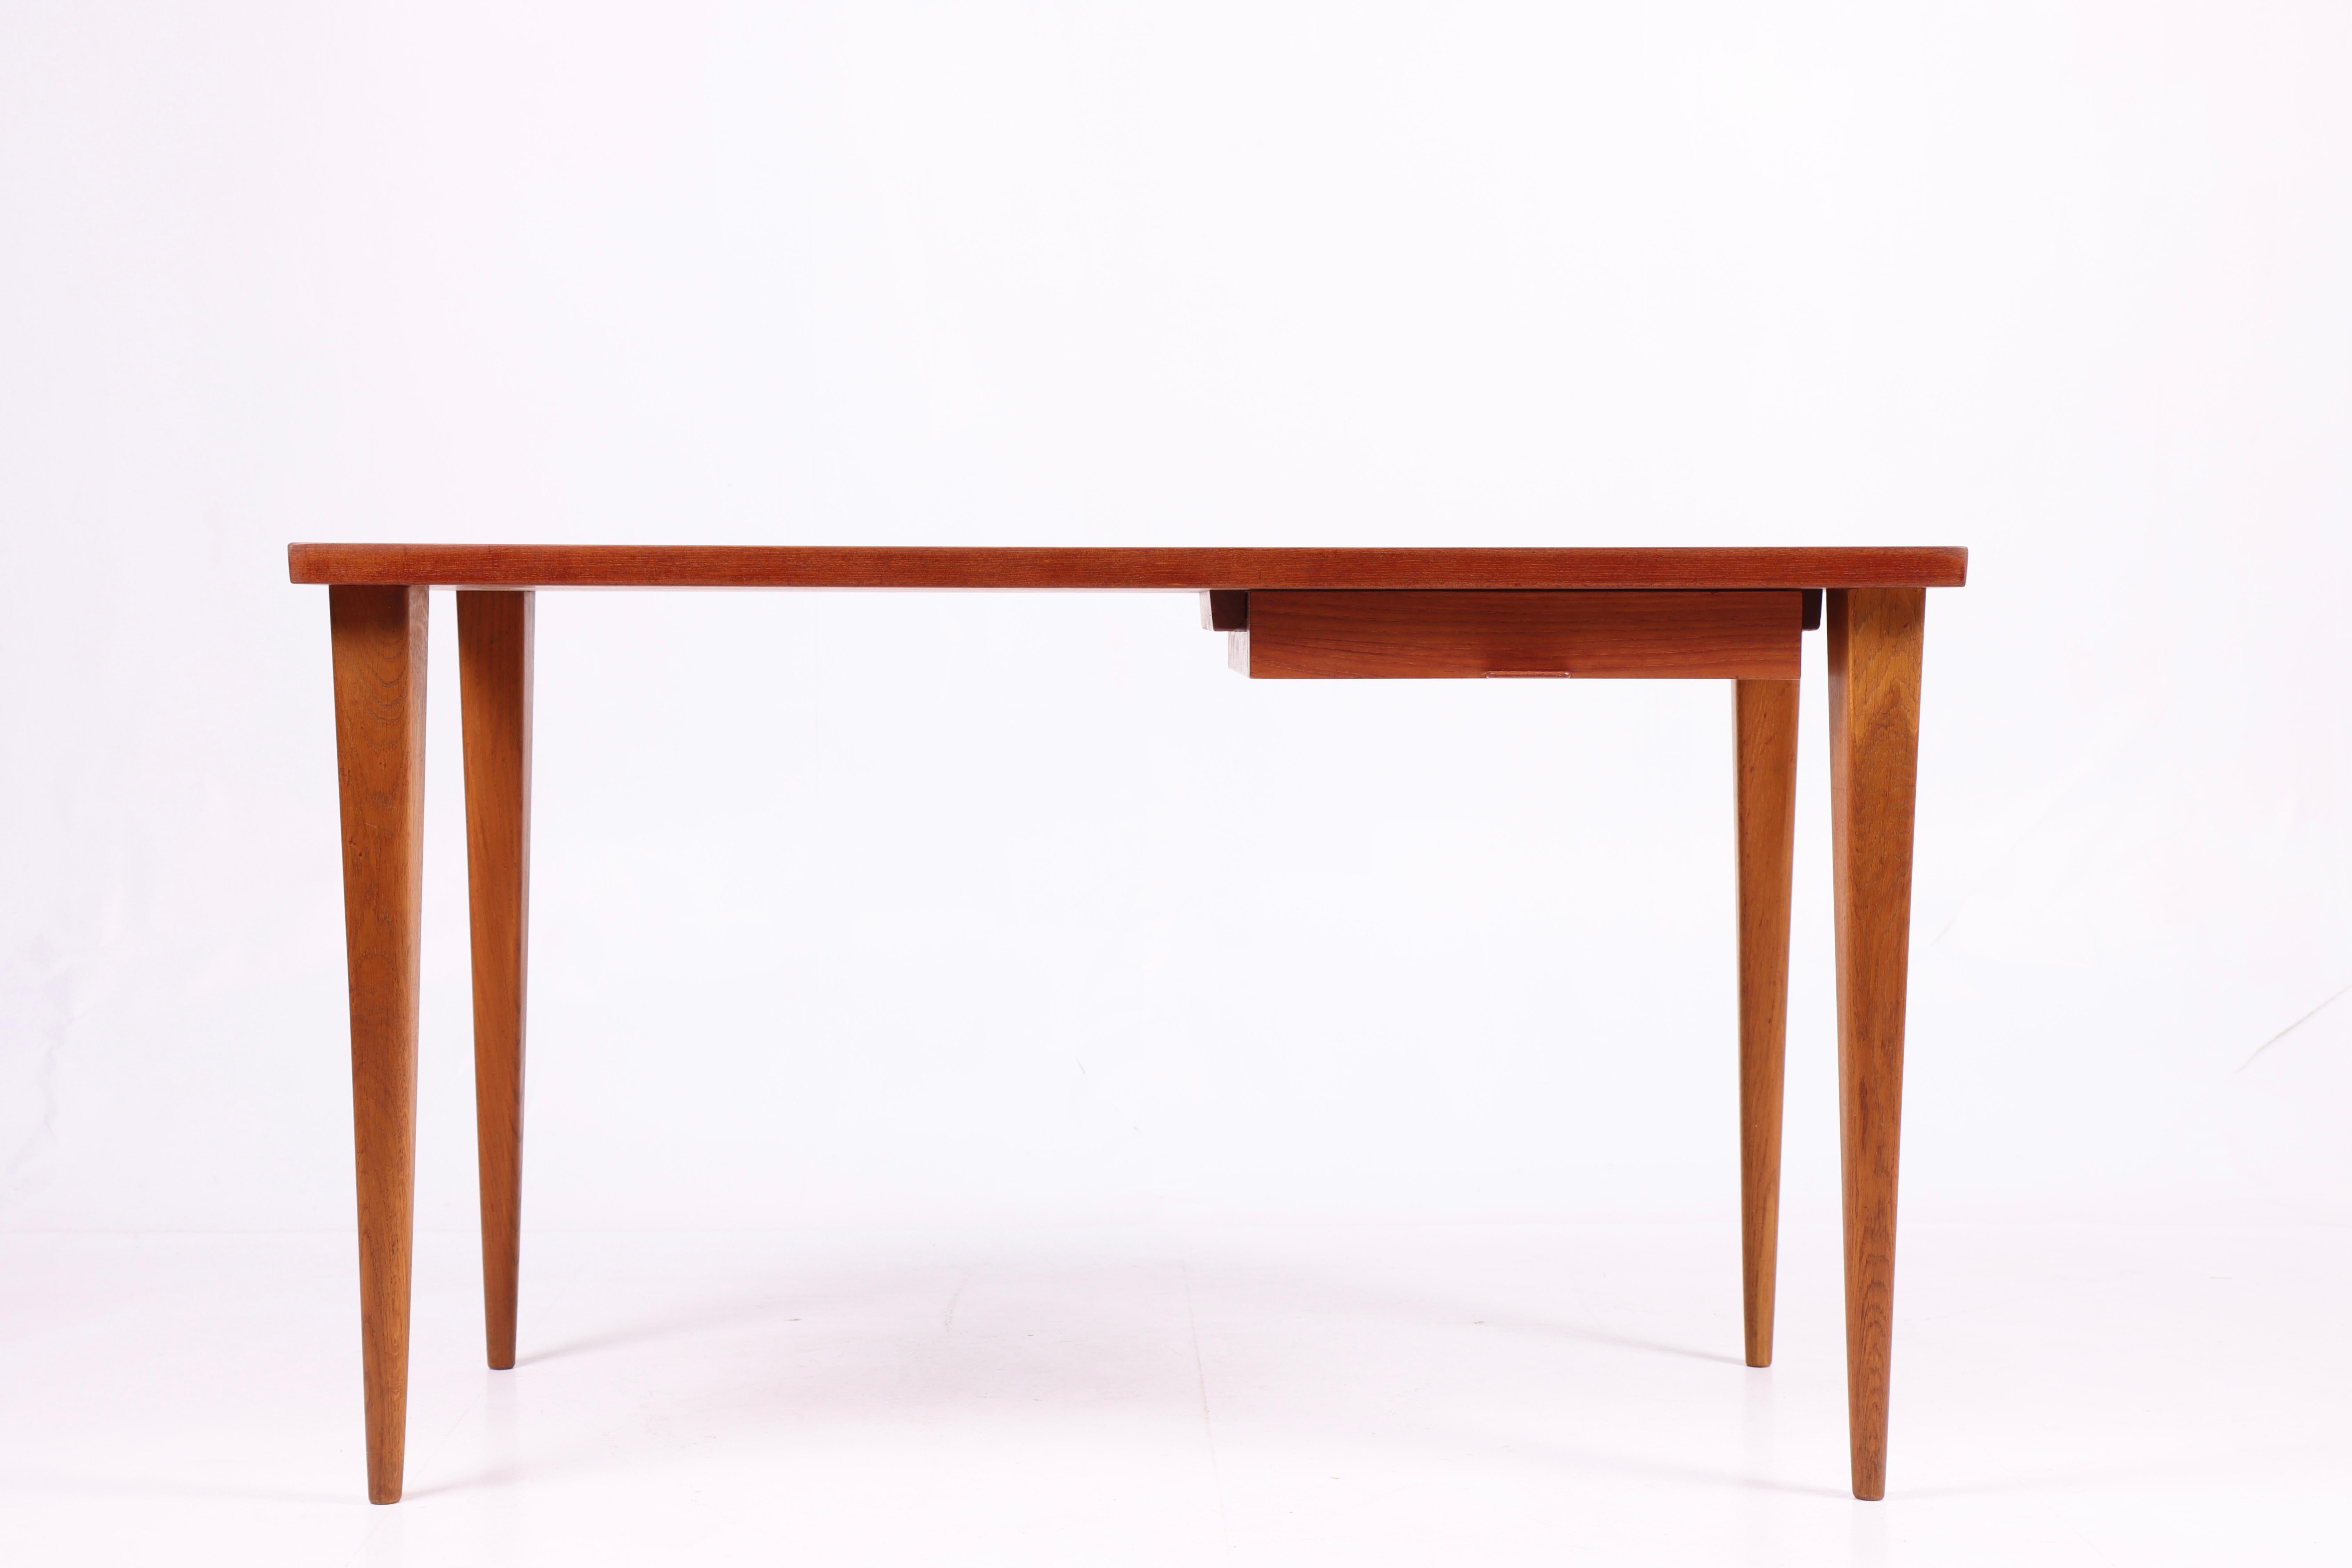 Rare freestanding desk in teak and beech, designed Nanna Ditzel and produced by Poul Kolds Savværk. Great original condition.